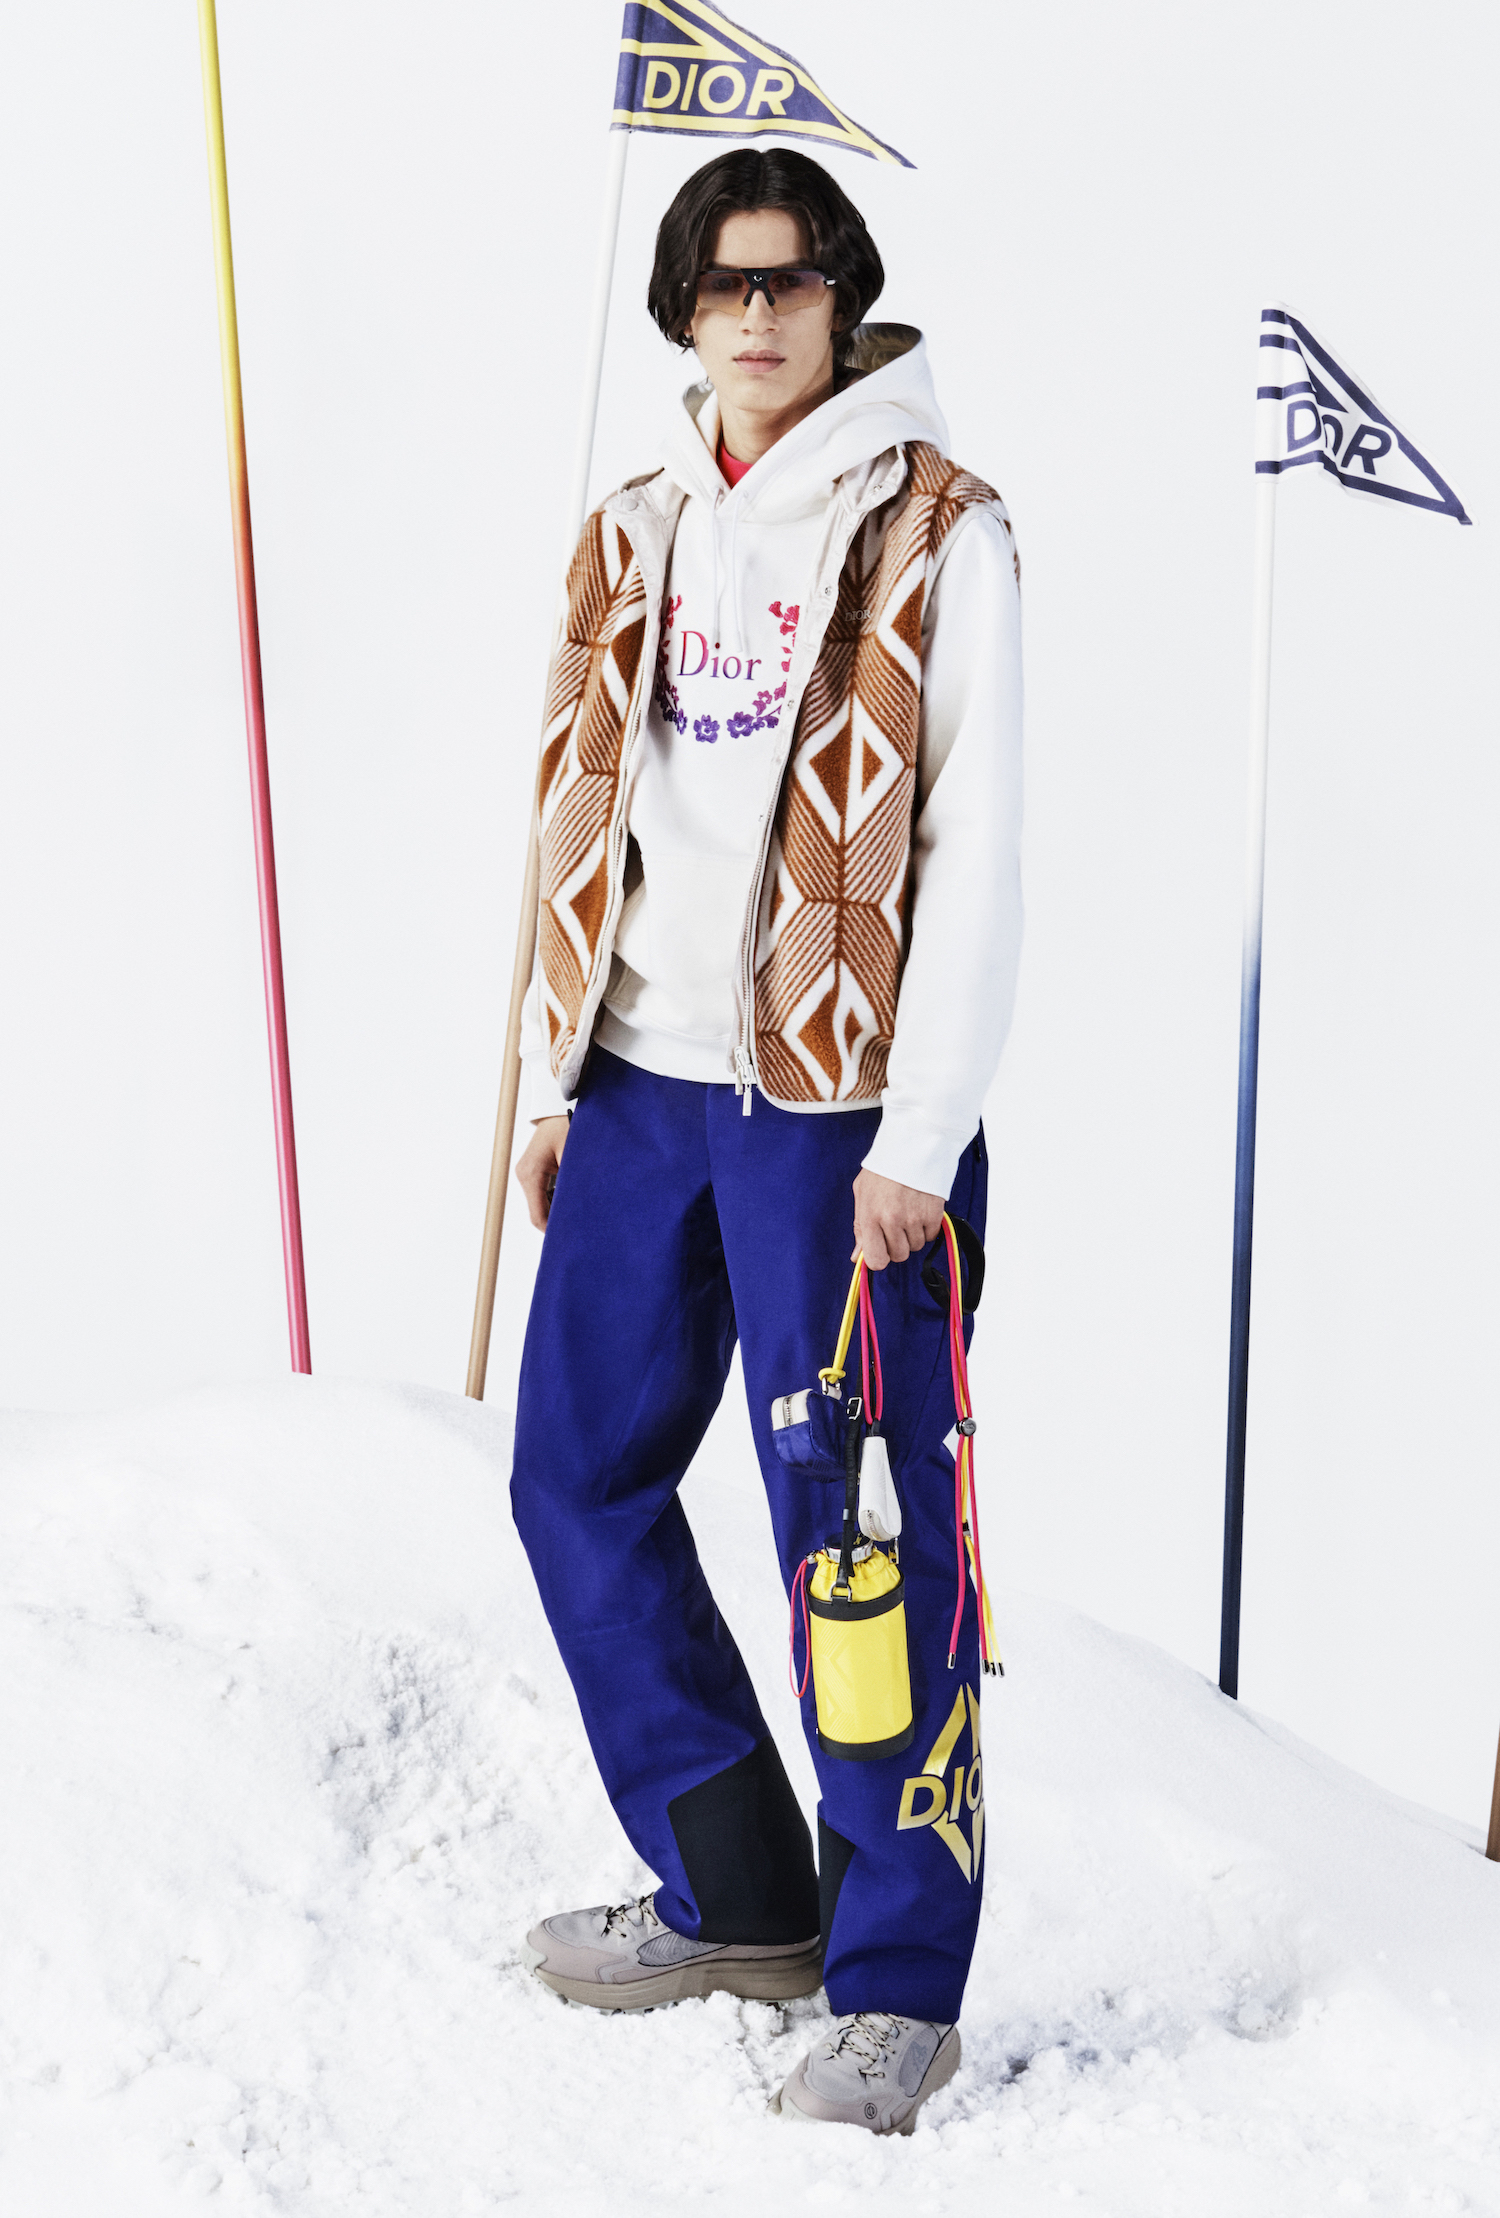 Dior's Ready-to-Wear Men's Ski Capsule Is Here